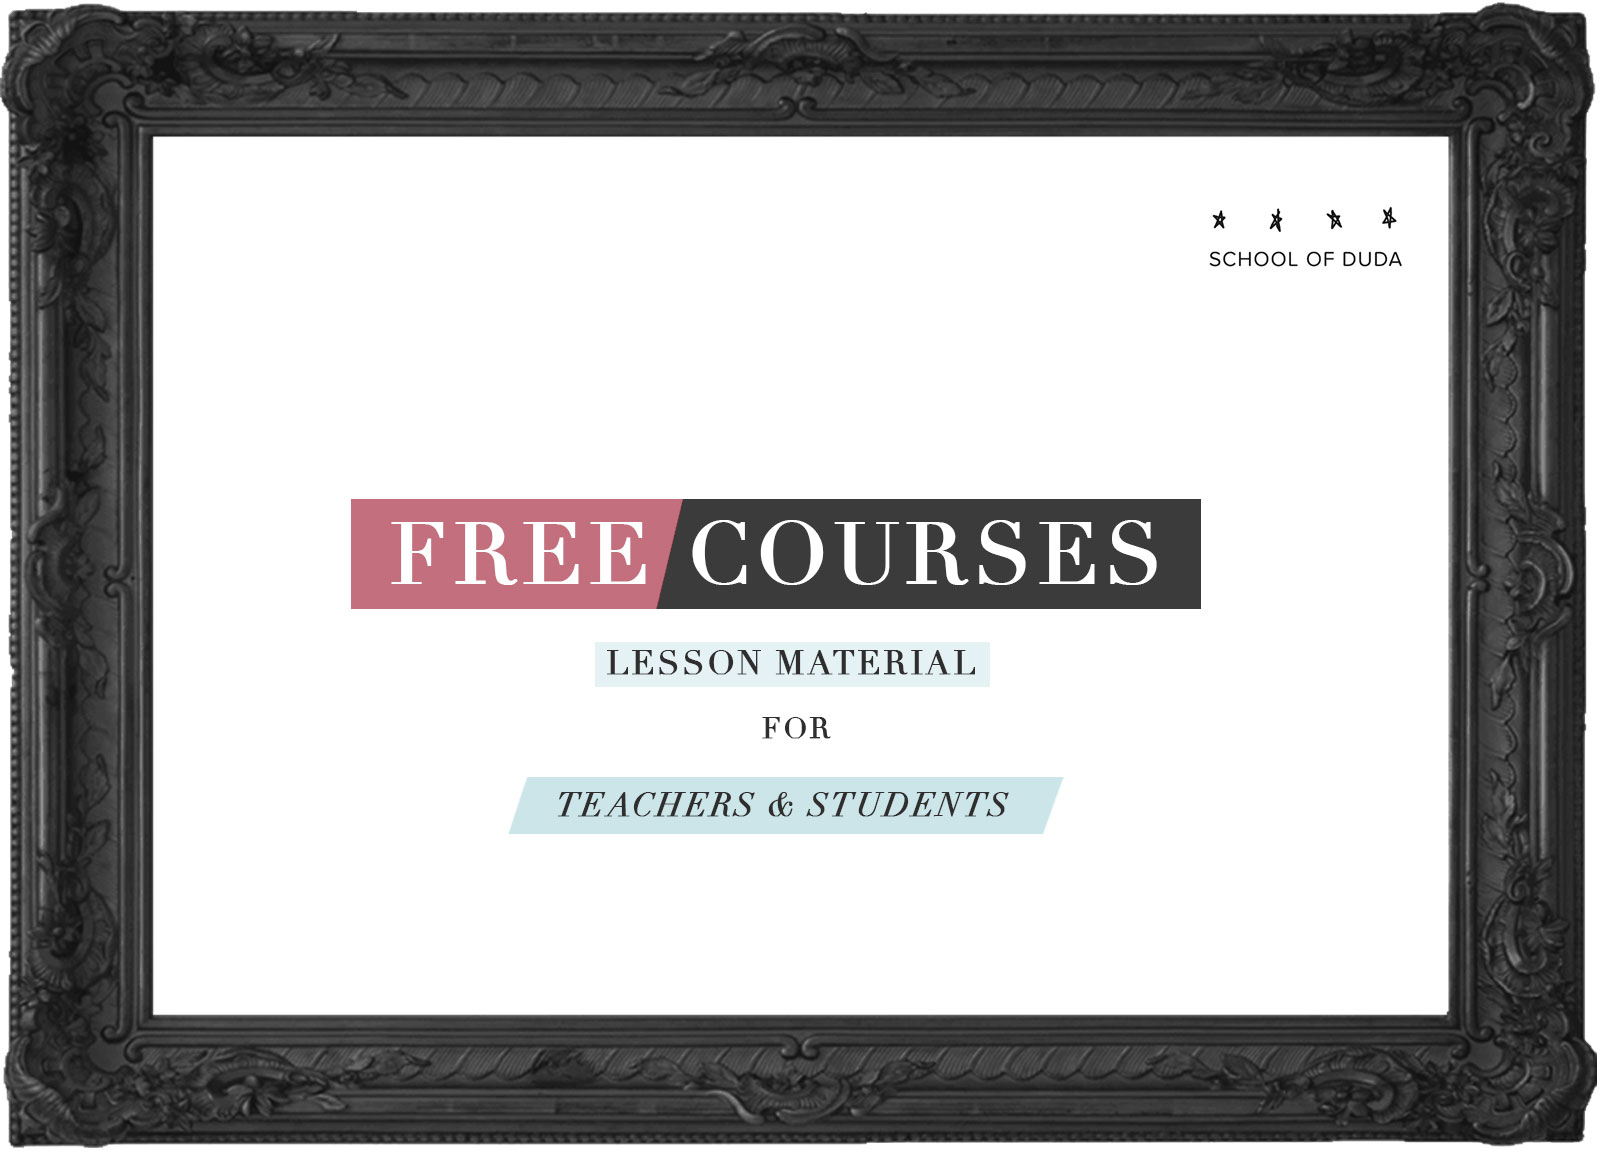 FREE COURSES : LESSON MATERIAL